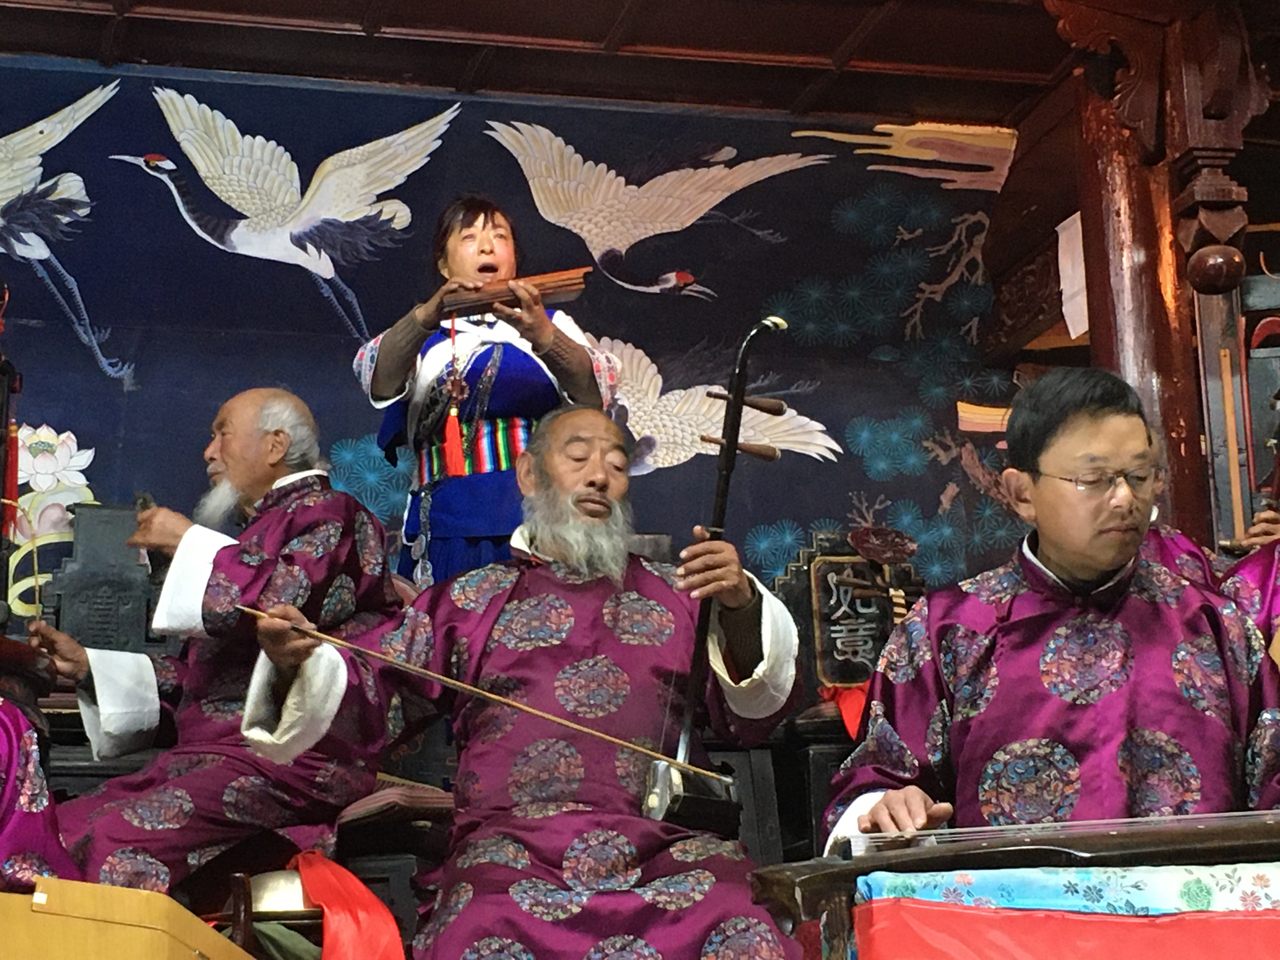 These Naxi musicians play without sheet music on centuries-old instruments, which were once hidden underground during the Cultural Revolution.